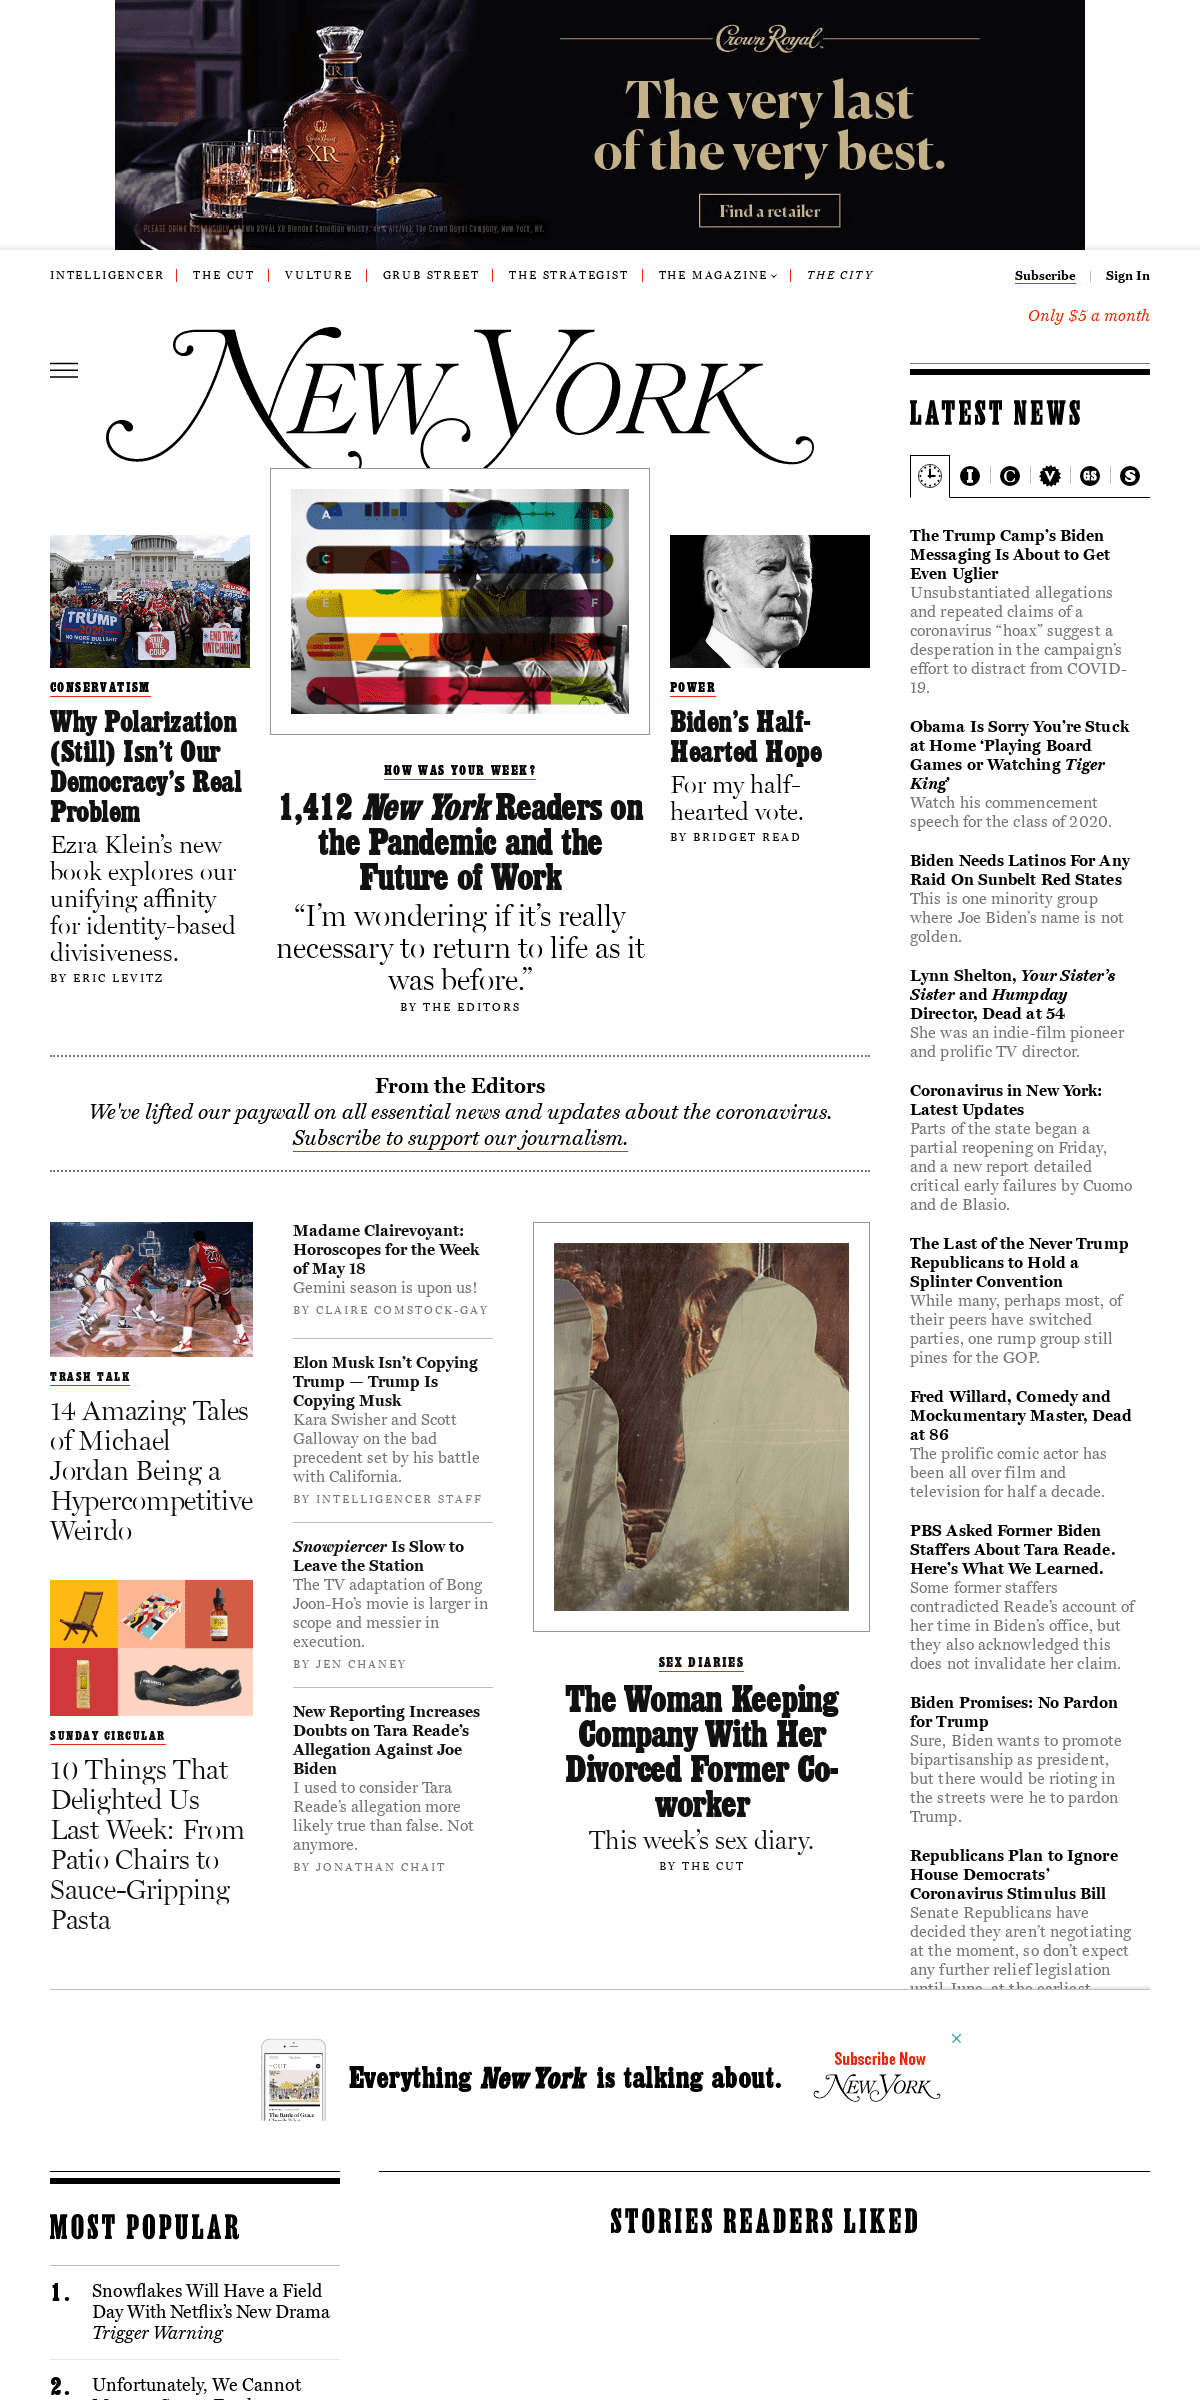 A complete backup of nymag.com